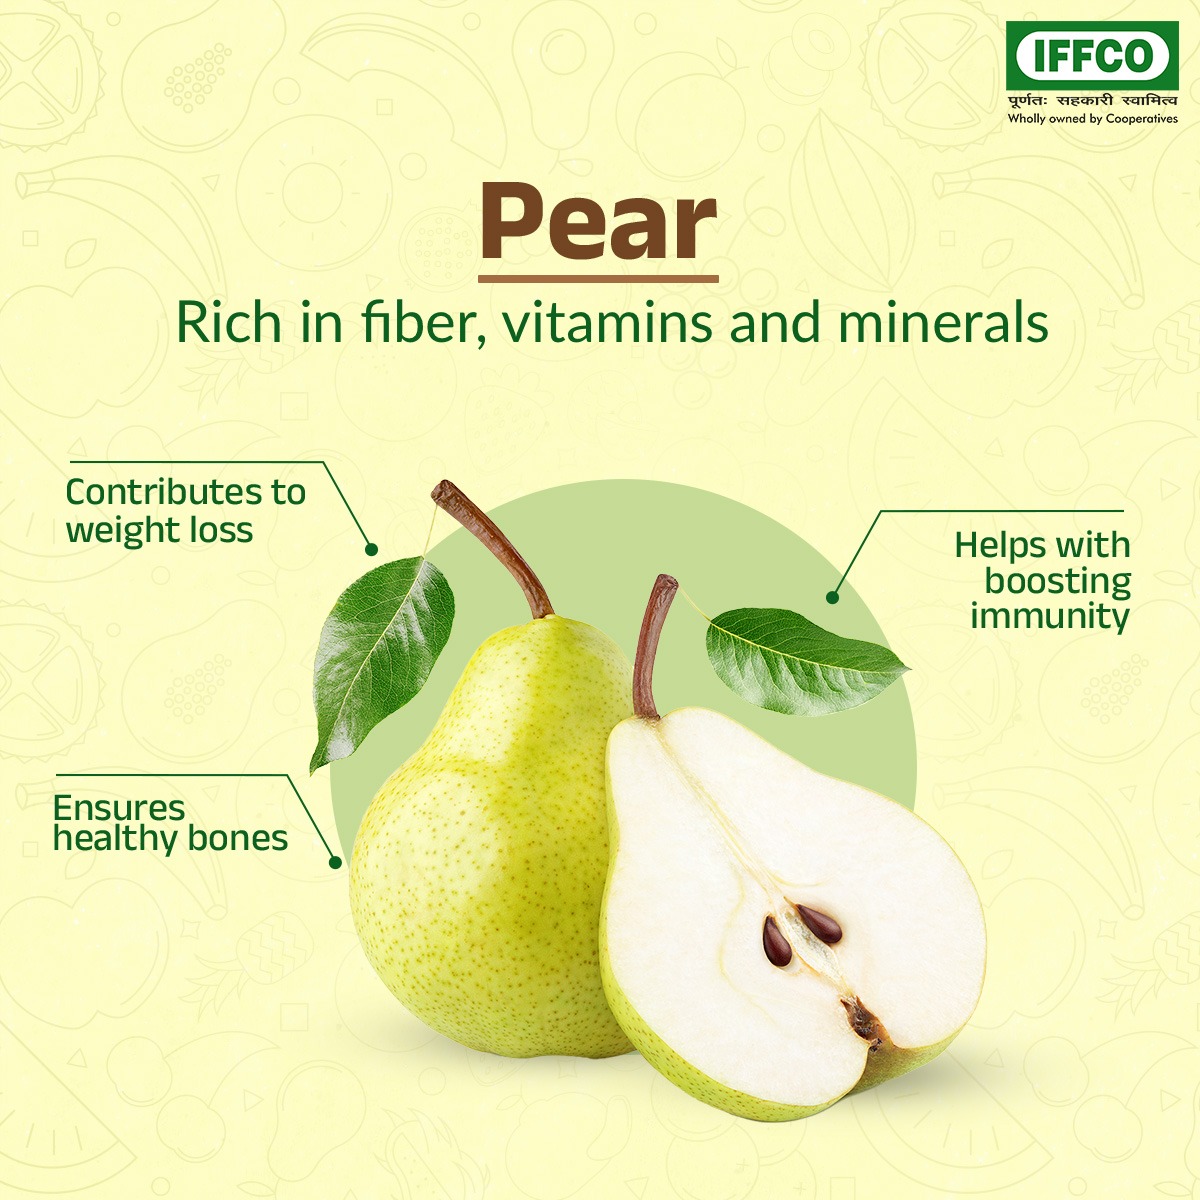 Pears are tasty and packed with rich nutrients. Their benefits are many in boosting your immunity and ensuring your overall well-being.

Make a healthy choice today and add pears to your everyday diet.

#IFFCO #HealthyFood #HealthBenefits #Pear #Immunity #HealthyLife